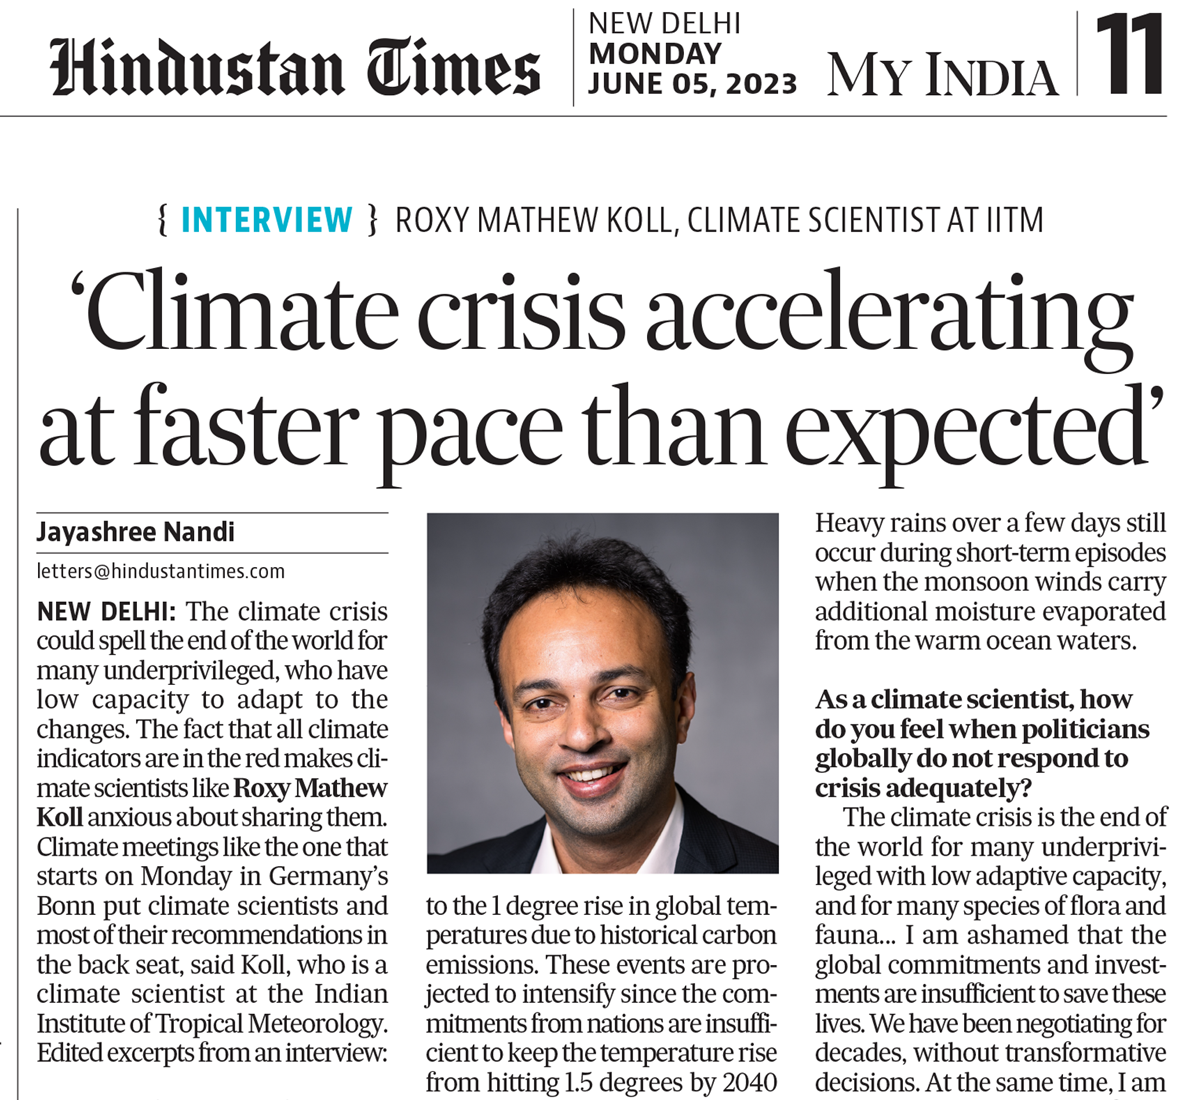 Climate crisis accelerating faster than expected. Interview with Roxy Mathew Koll in Hindustan Times.